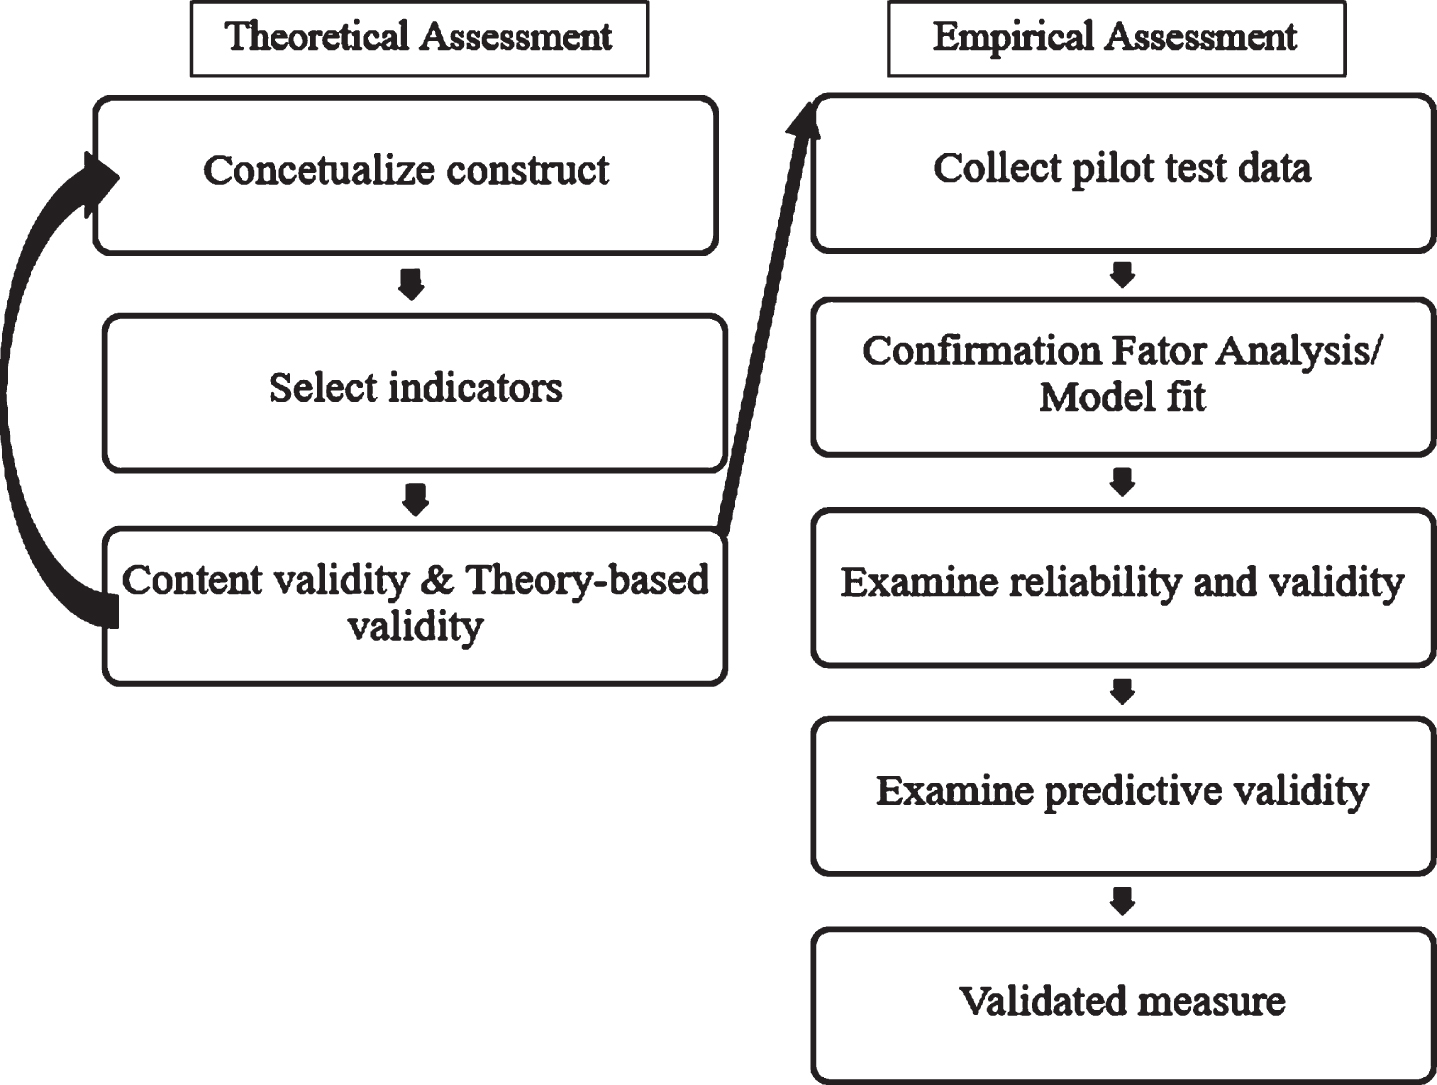 Our proposed assessment, including theoretical and empirical approaches [72].